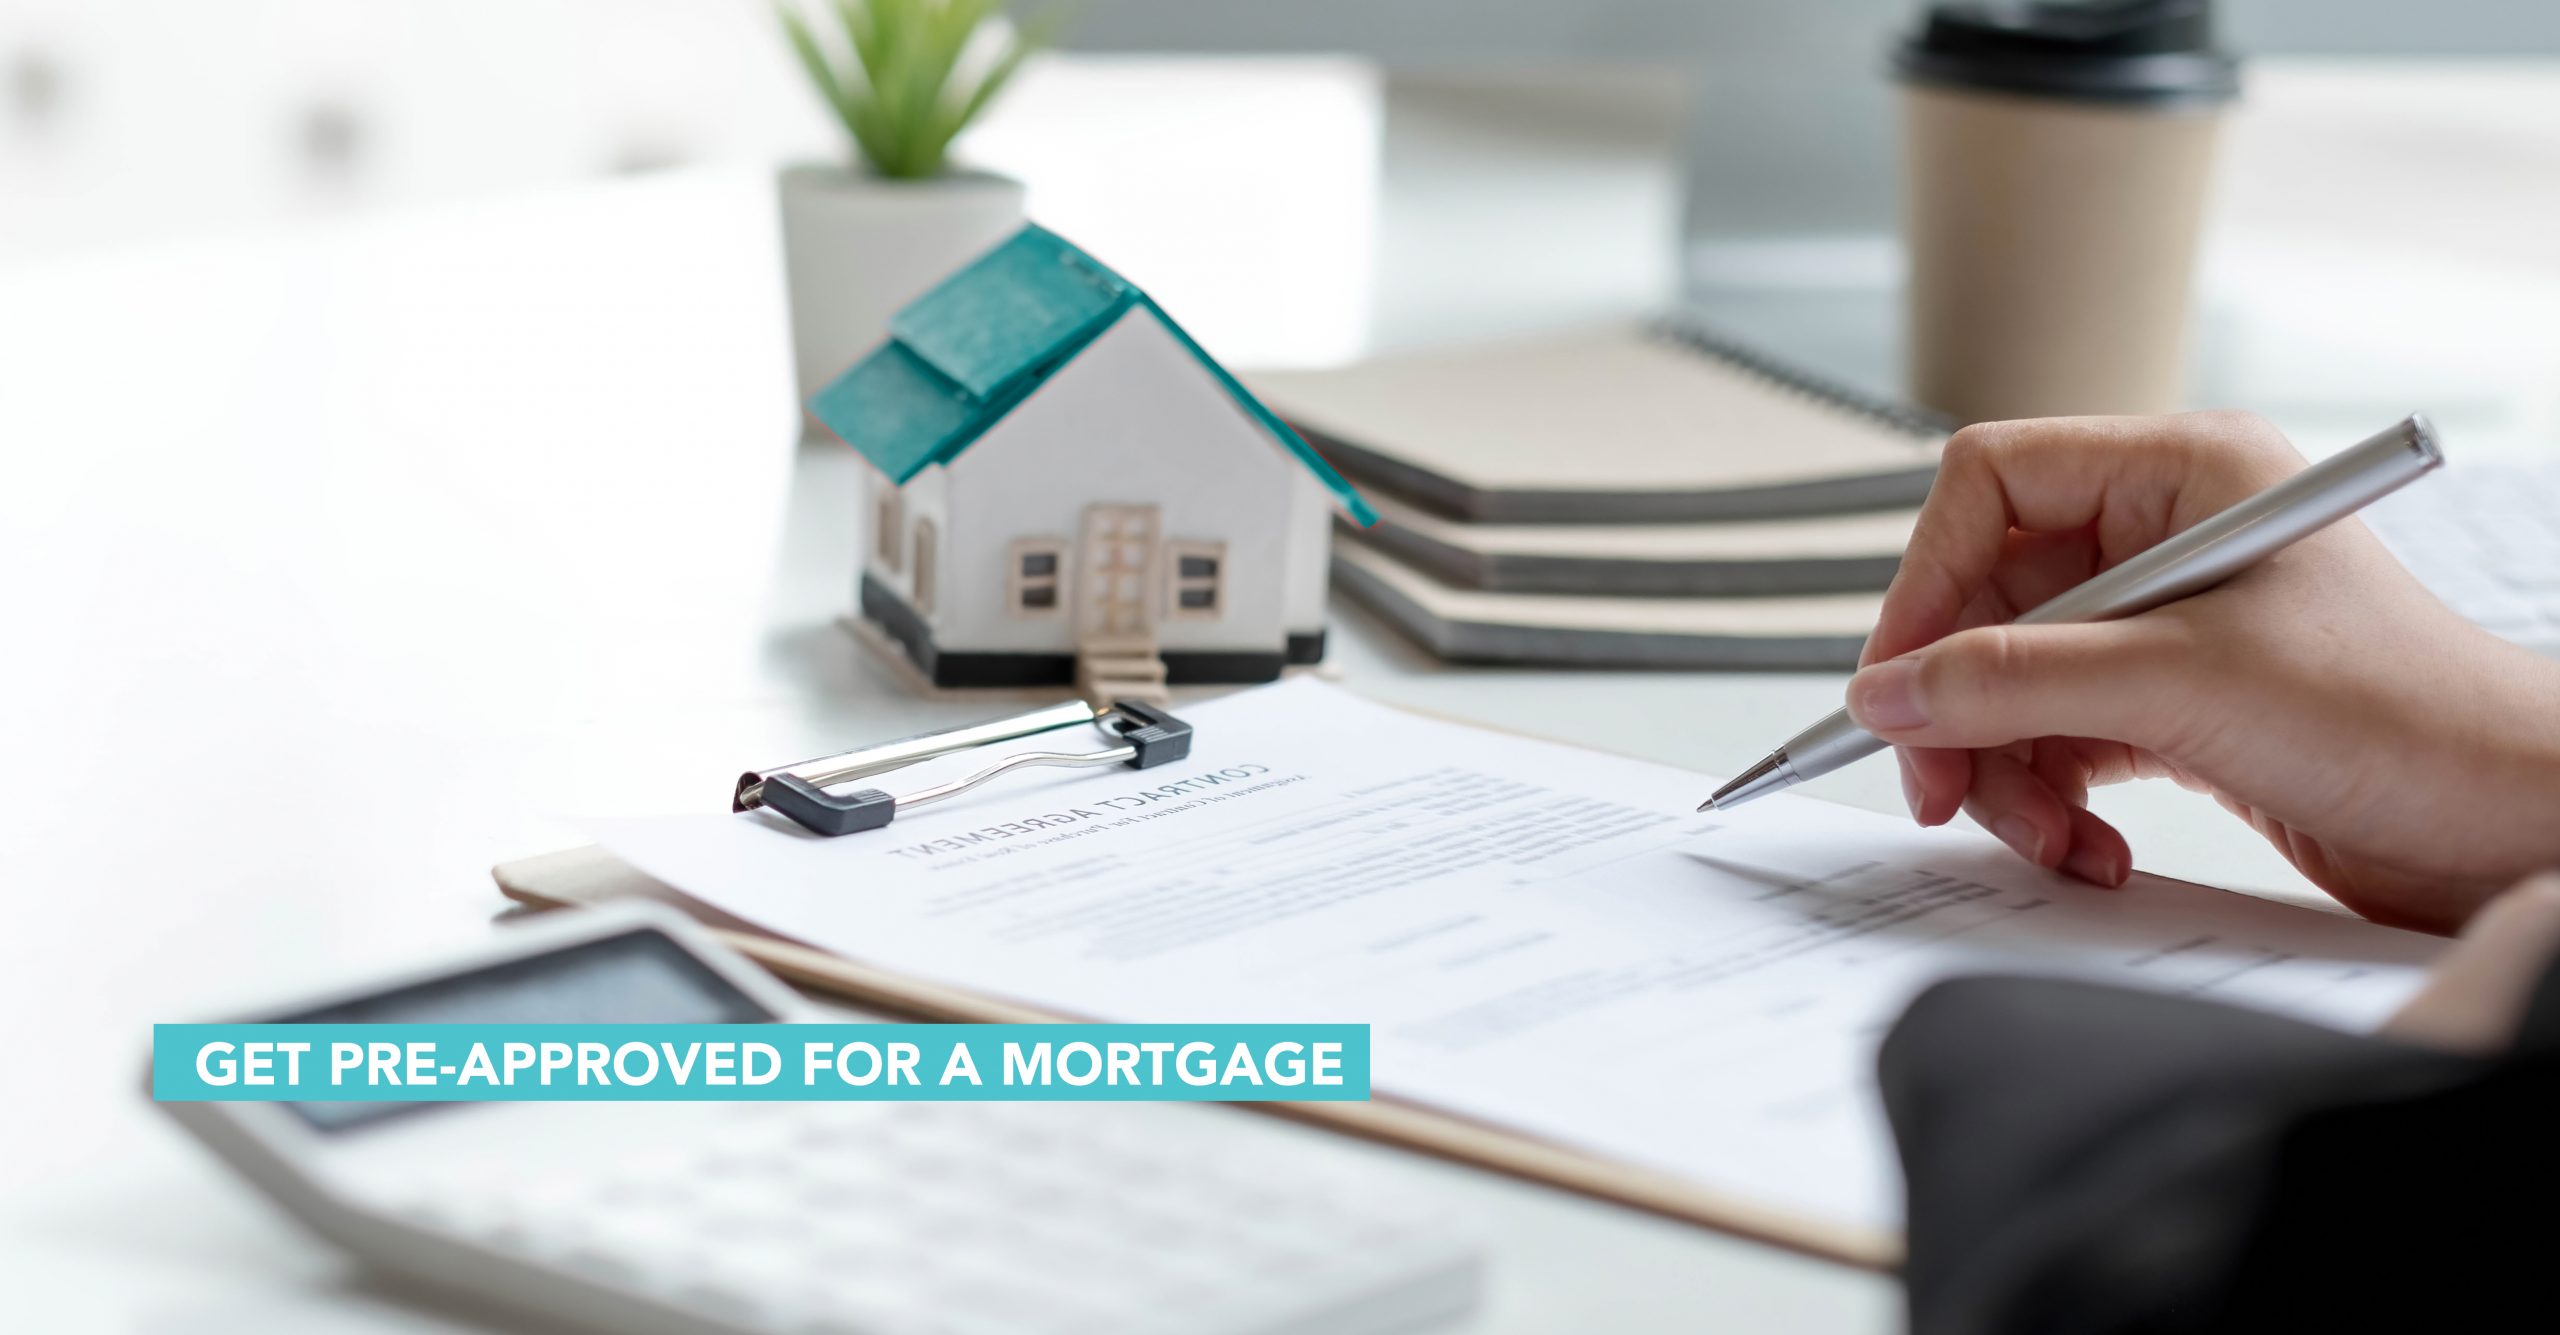 Step 2: Get Pre-Approved for a Mortgage